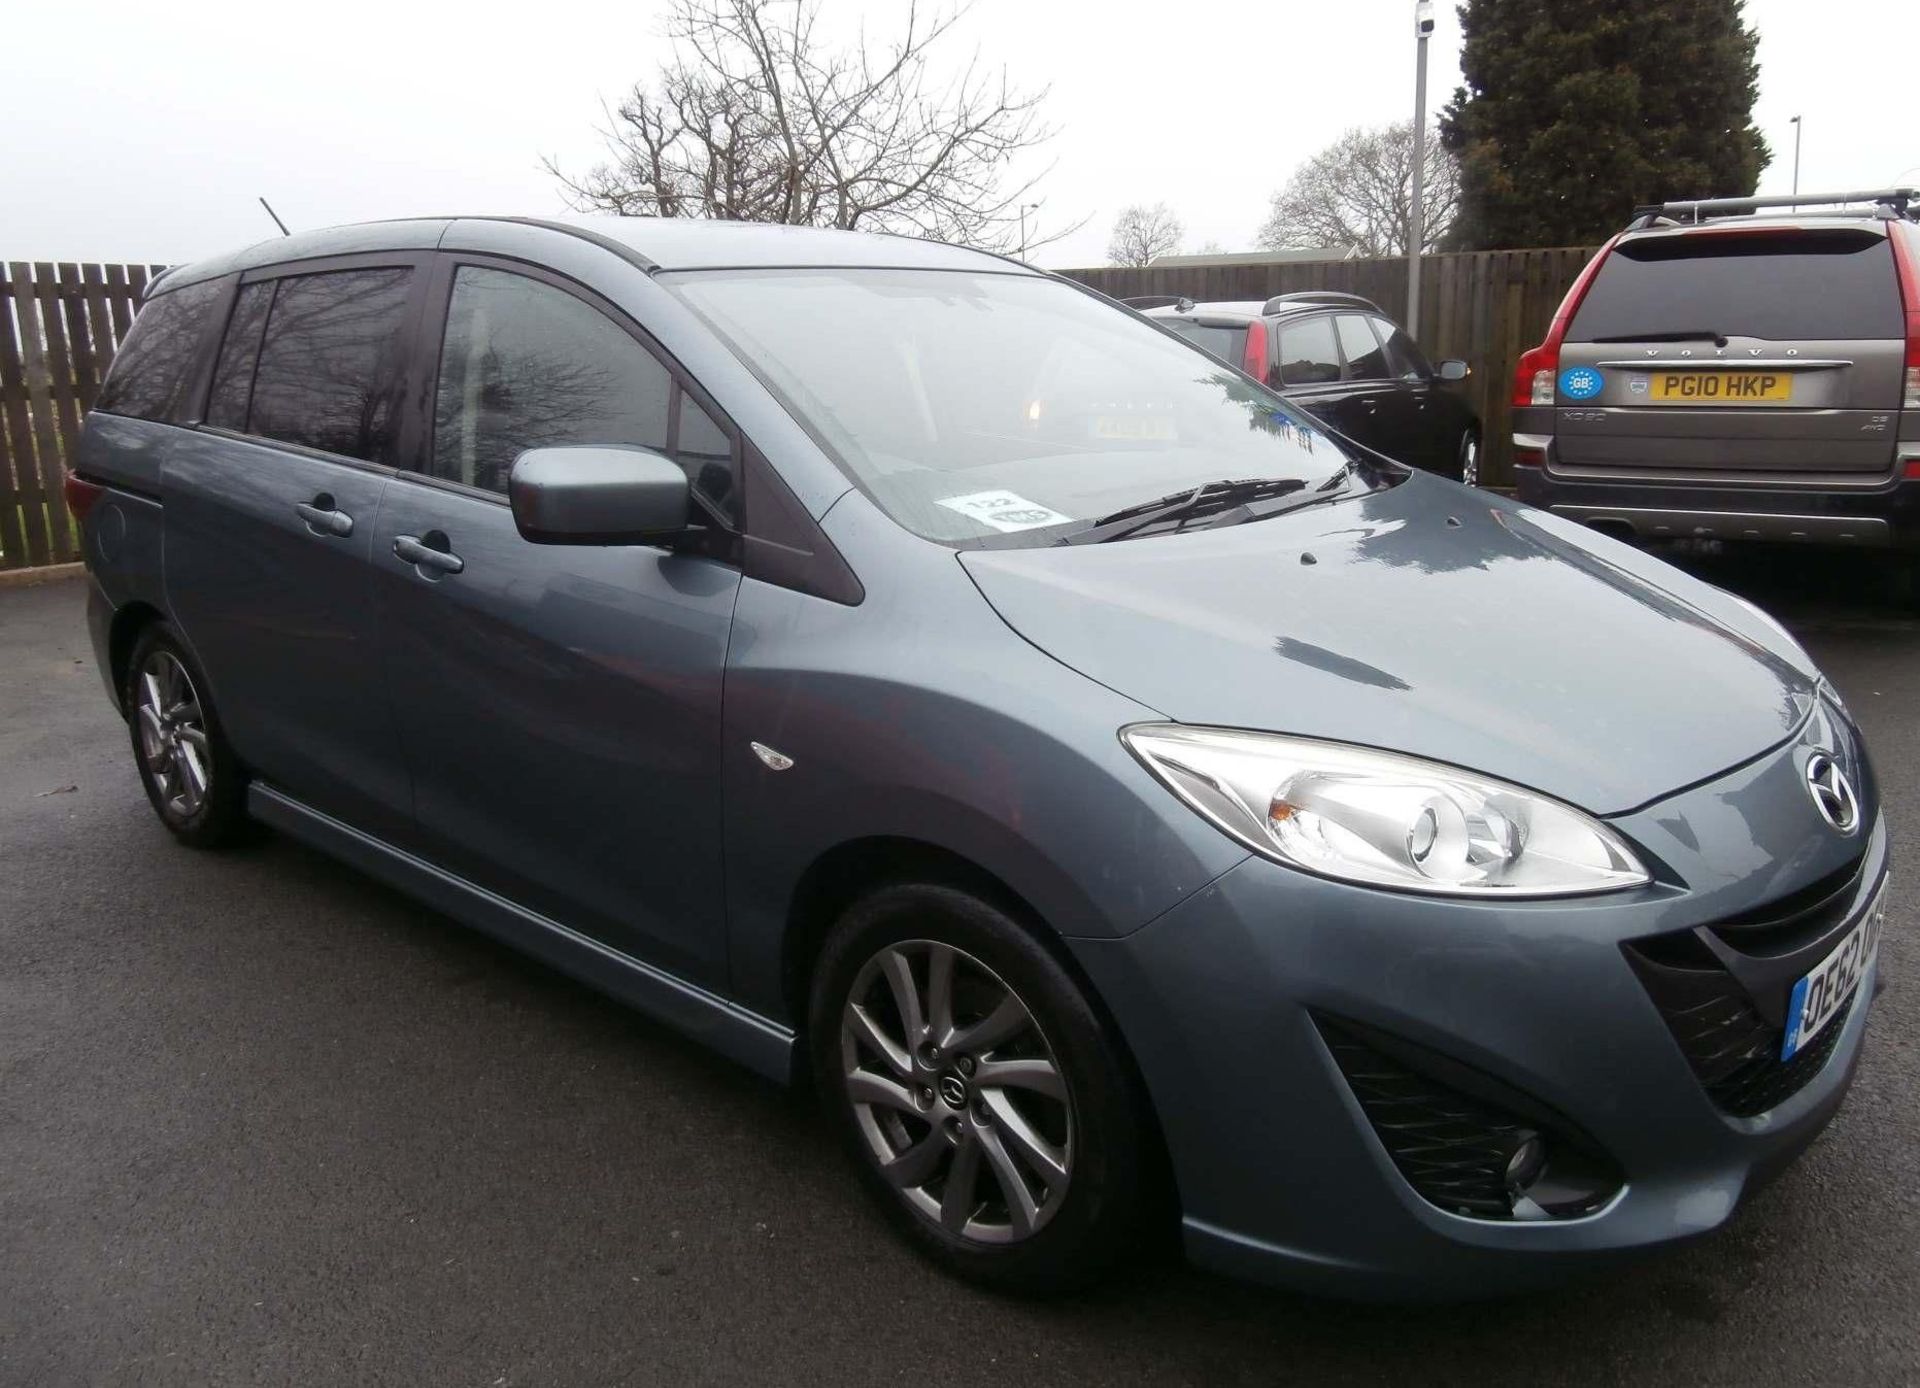 2013 Mazda 5 2.0 Venture Edition 5 Dr MPV - CL505 - NO VAT ON THE HAMMER - Location: Corby, N - Image 6 of 9